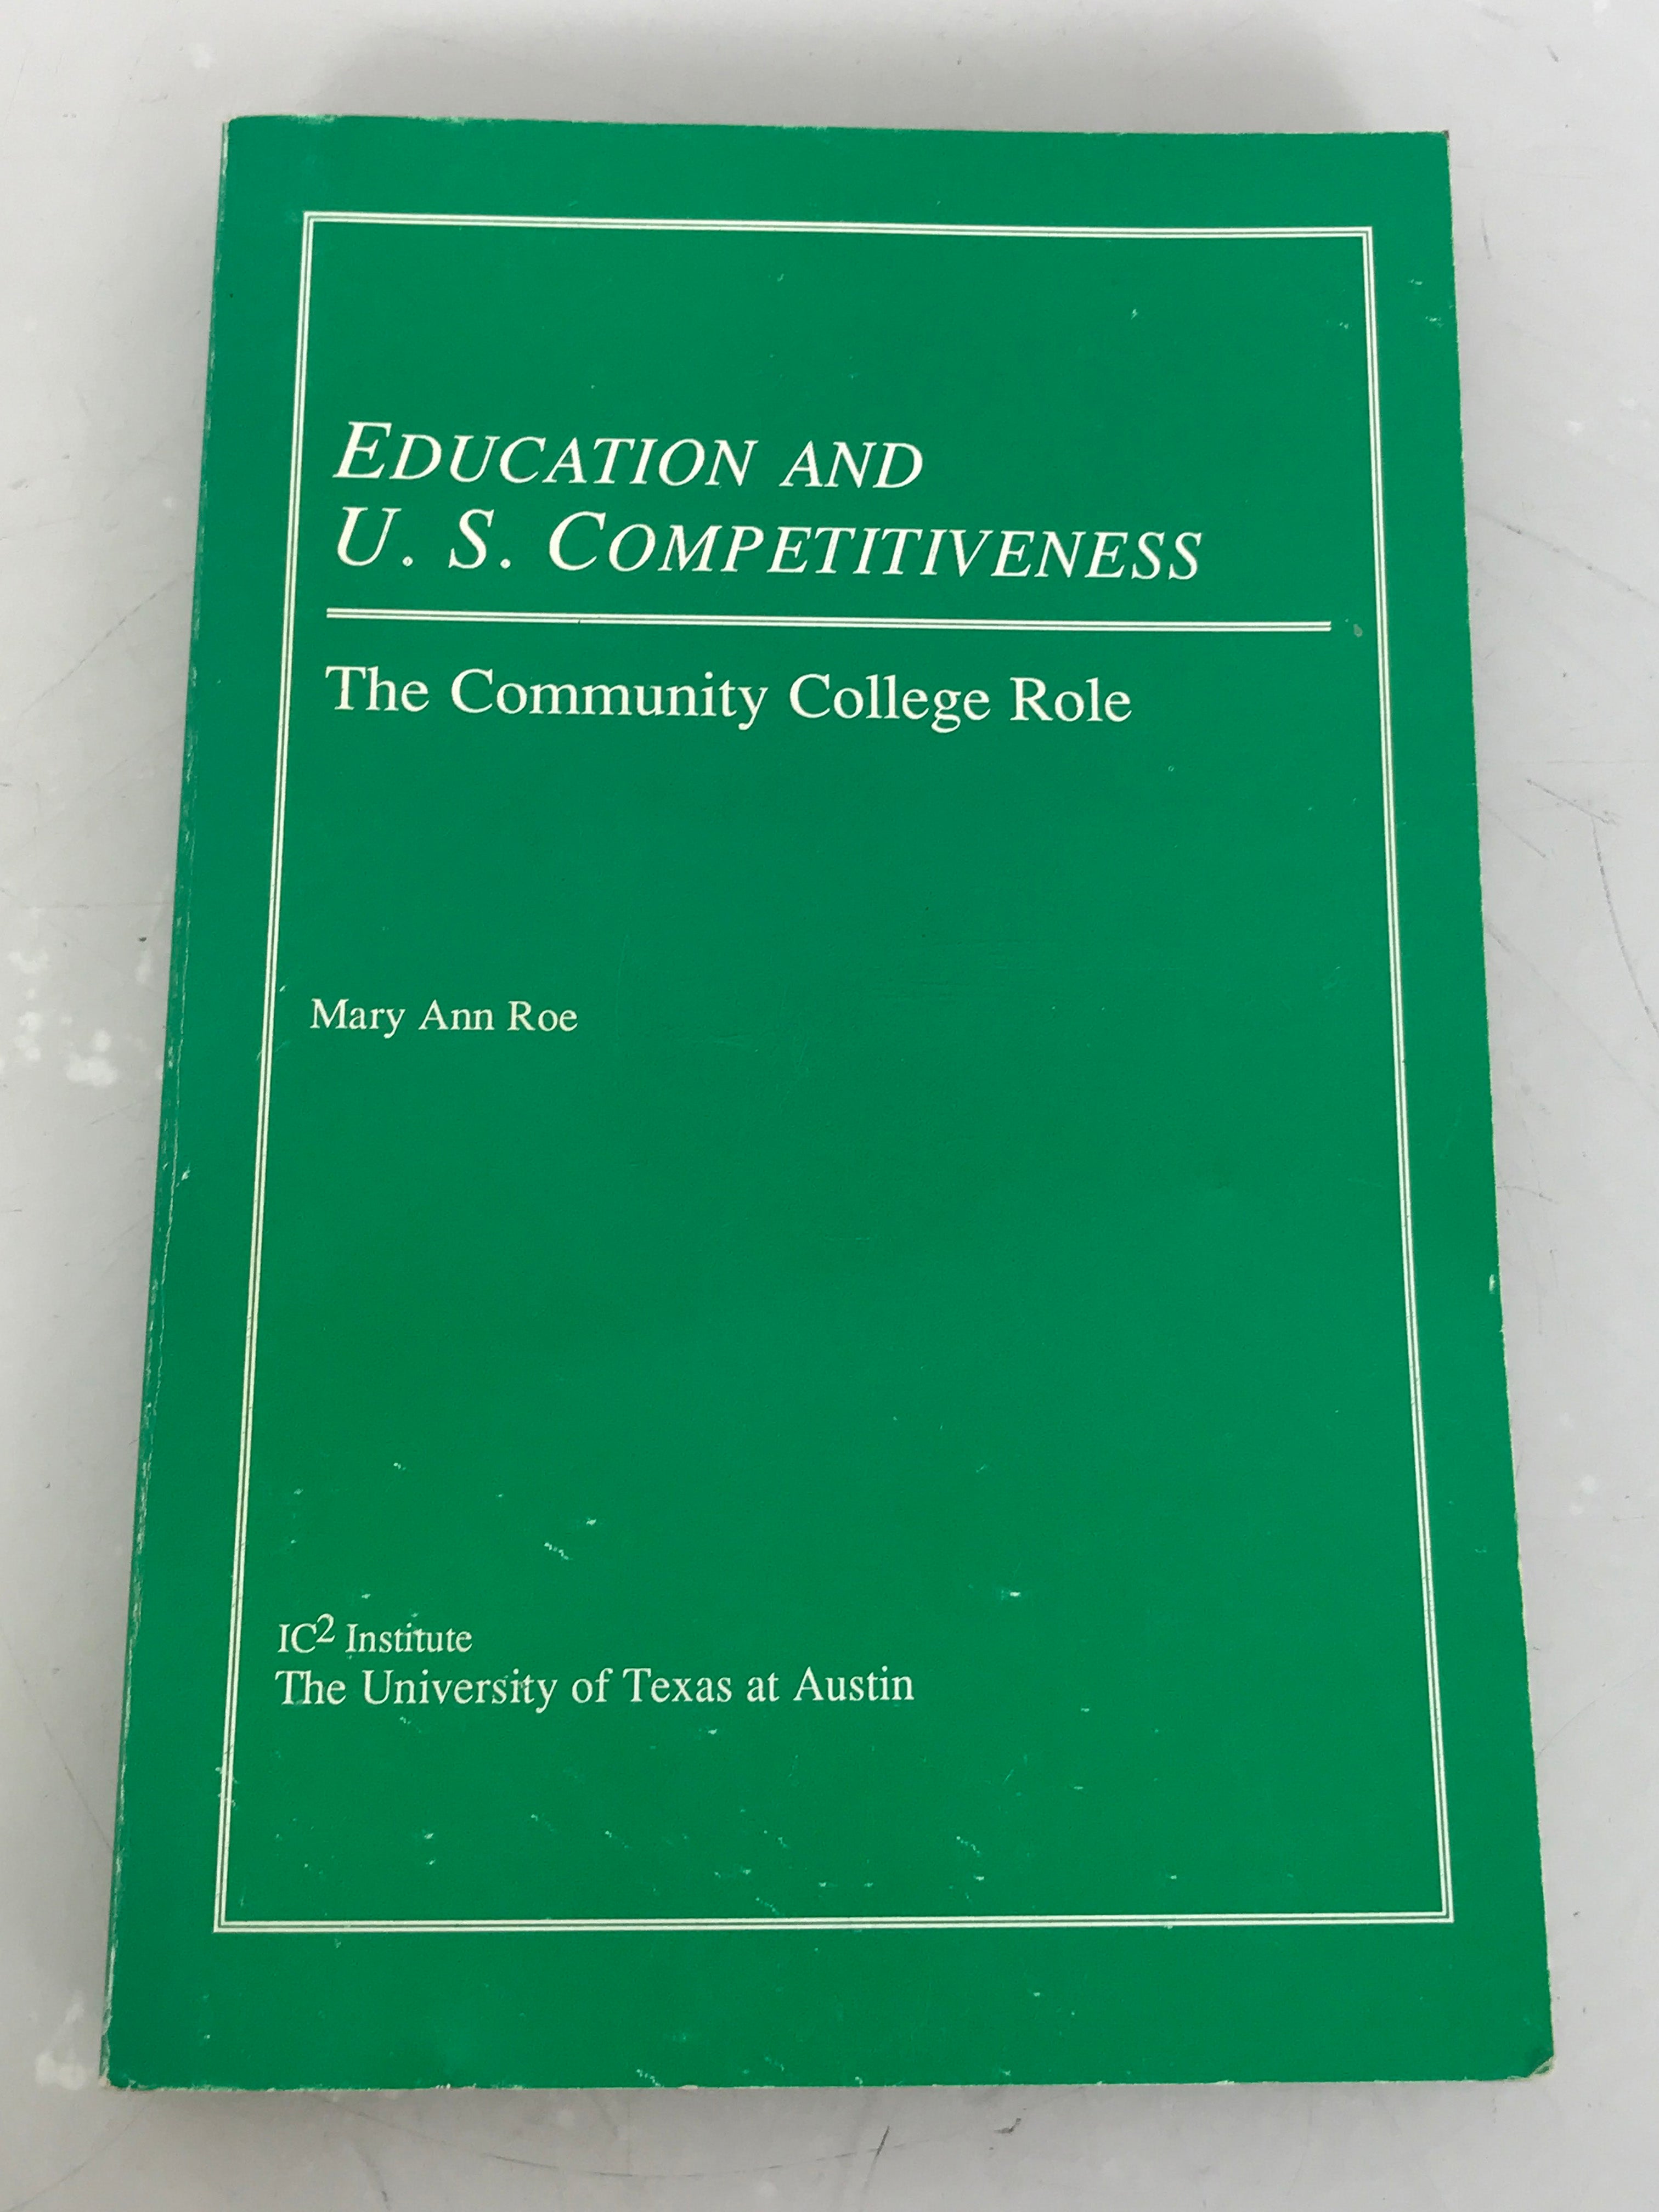 Education and U.S. Competitiveness by Mary Ann Roe Inscribed 1989 SC